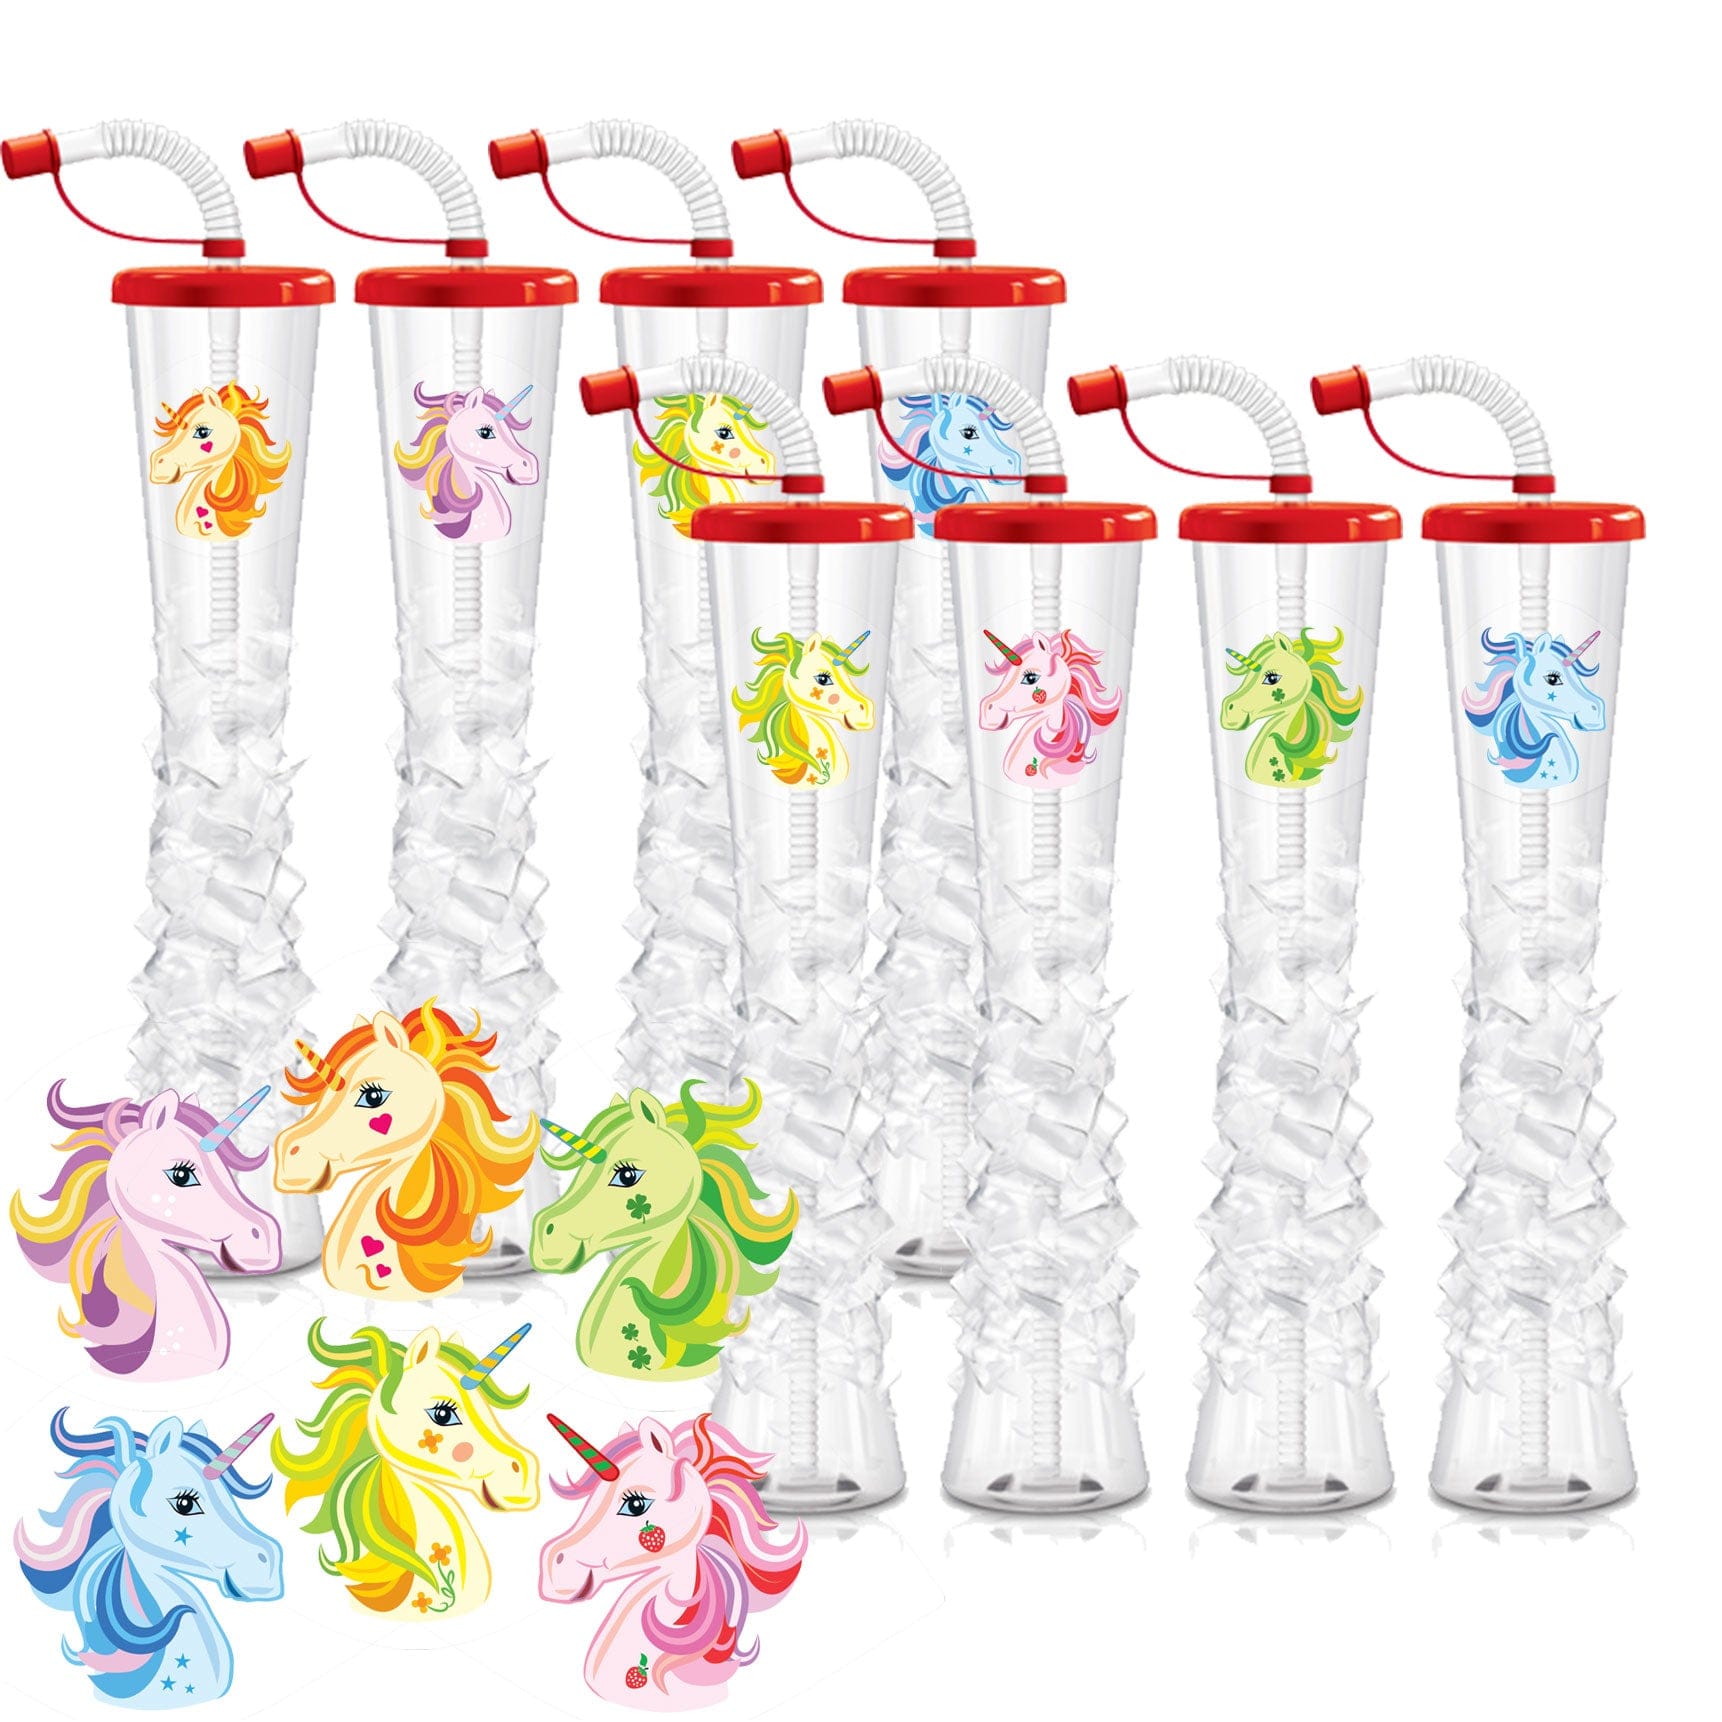 Sweet World USA Yard Cups Red with Unicorn Unicorn Ice Yard Cups (54 Cups) - for Margaritas and Frozen Drinks, Kids Parties - 17oz. (500ml) cups with lids and straws